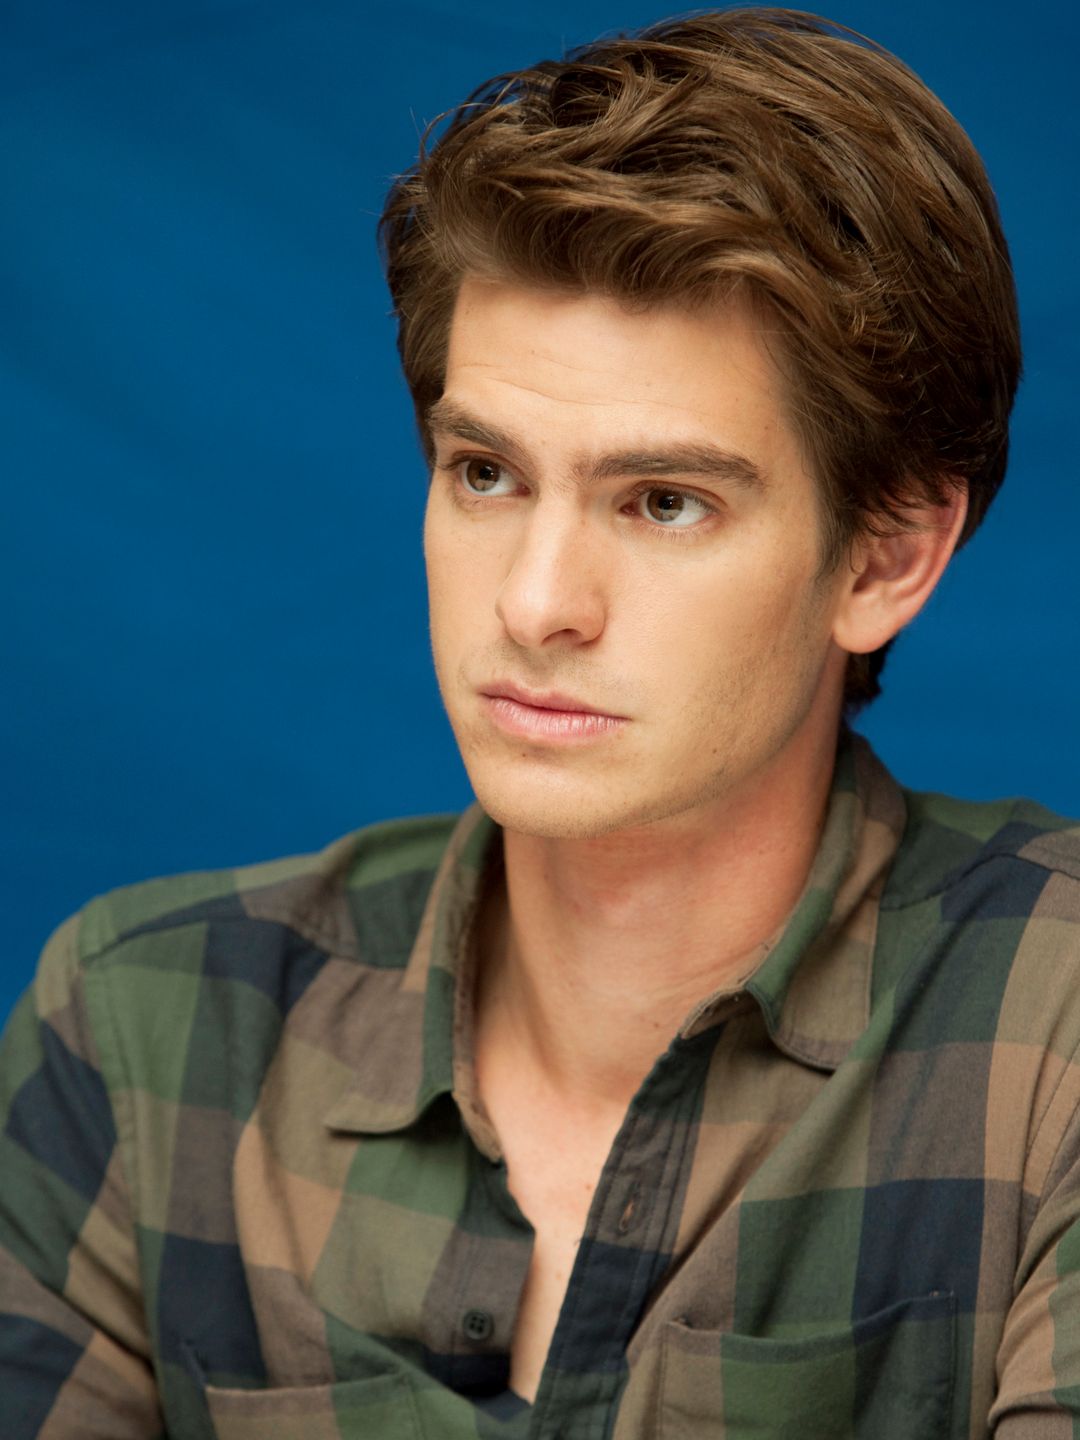 Andrew Garfield height and weight